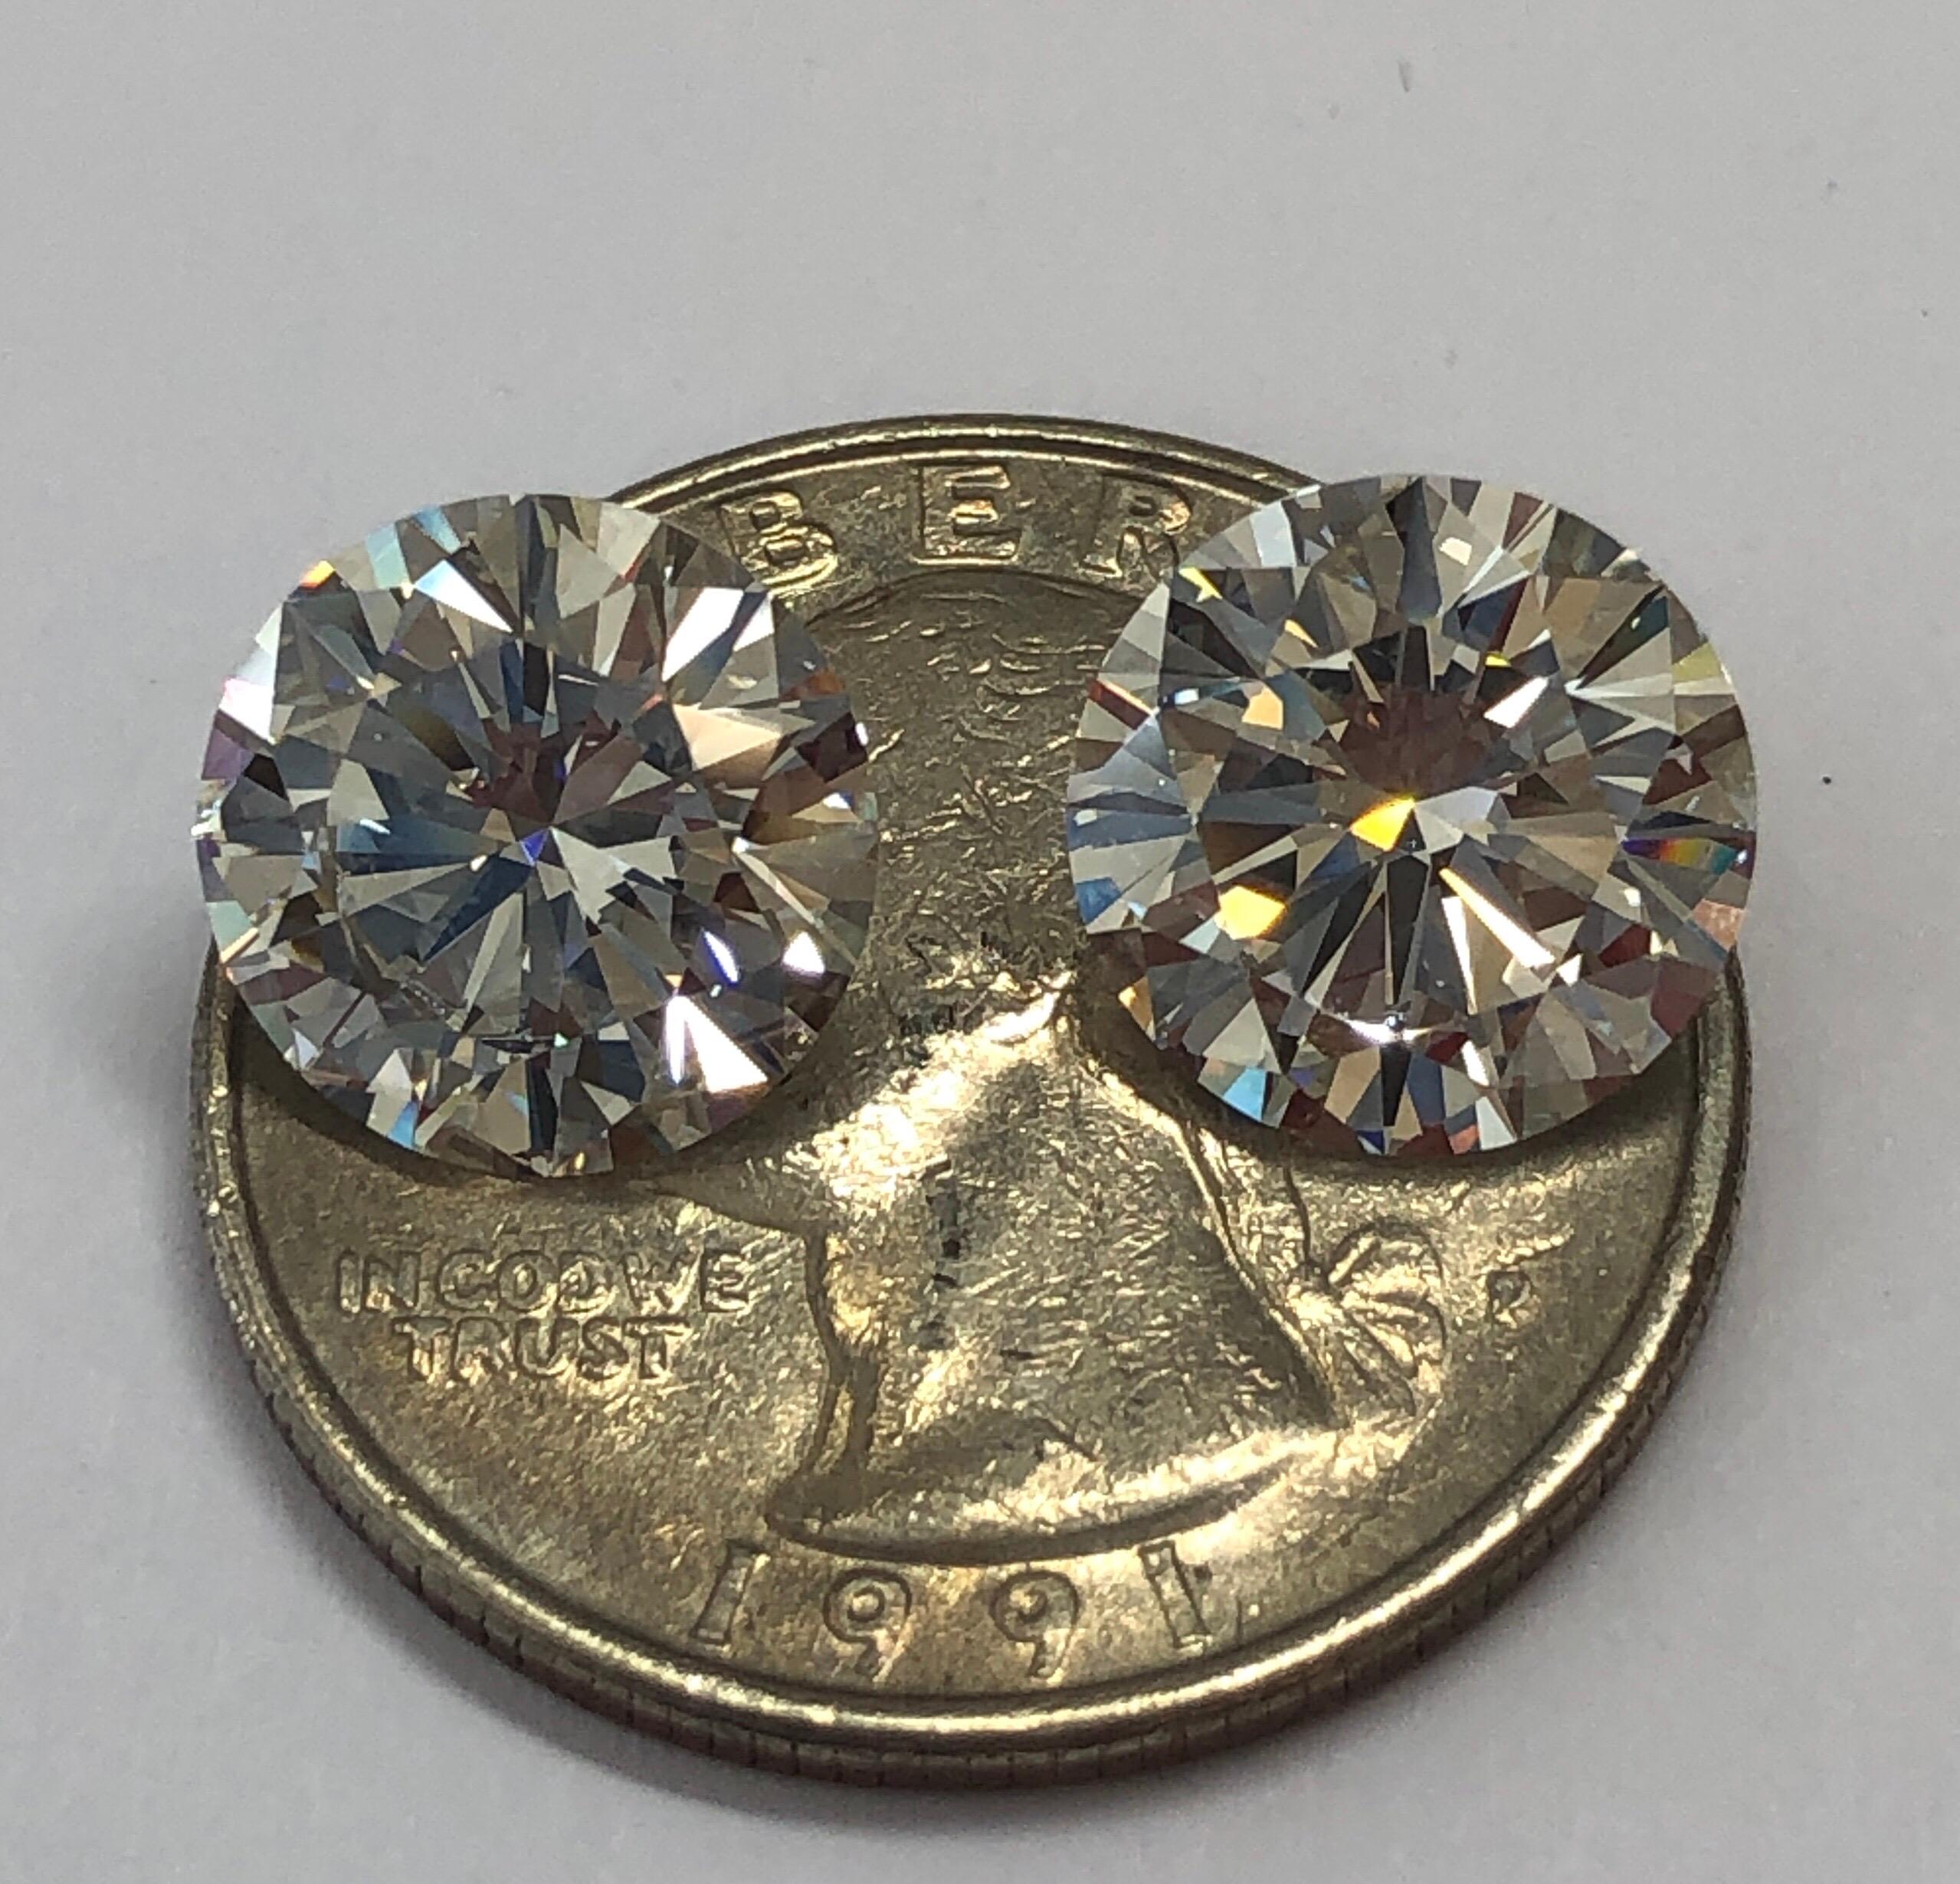 The matched pair of D / IF diamonds (D Color Internally Flawless) weighs 8.13 carat total. It is extremely difficult to find a match in this size and quality. The diamonds are triple Excellent Cut, Polish and Symmetry, No Fluorescence and